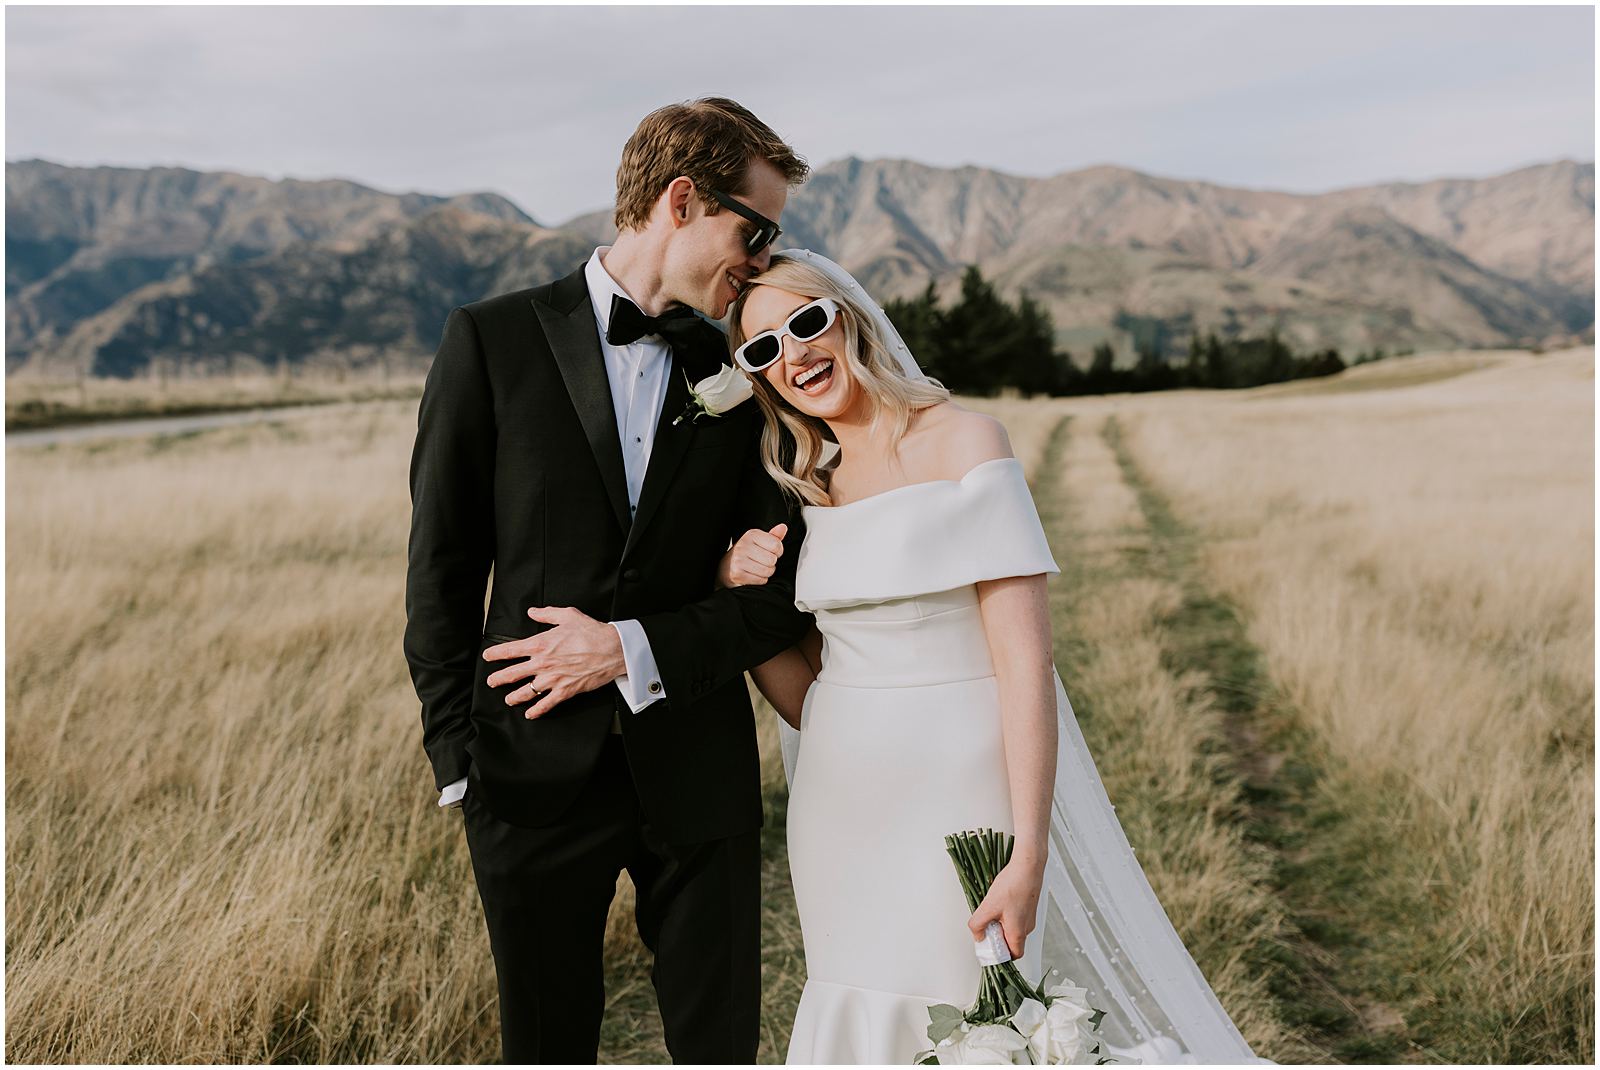 Charlotte Kiri Photography - Wedding Photography with a groom wearing a black tuxedo courteously escorting his wife who wears a lovely strapless gown and trendy white sunglasses, down a track in the grass of a big open field in Wanaka, New Zealand